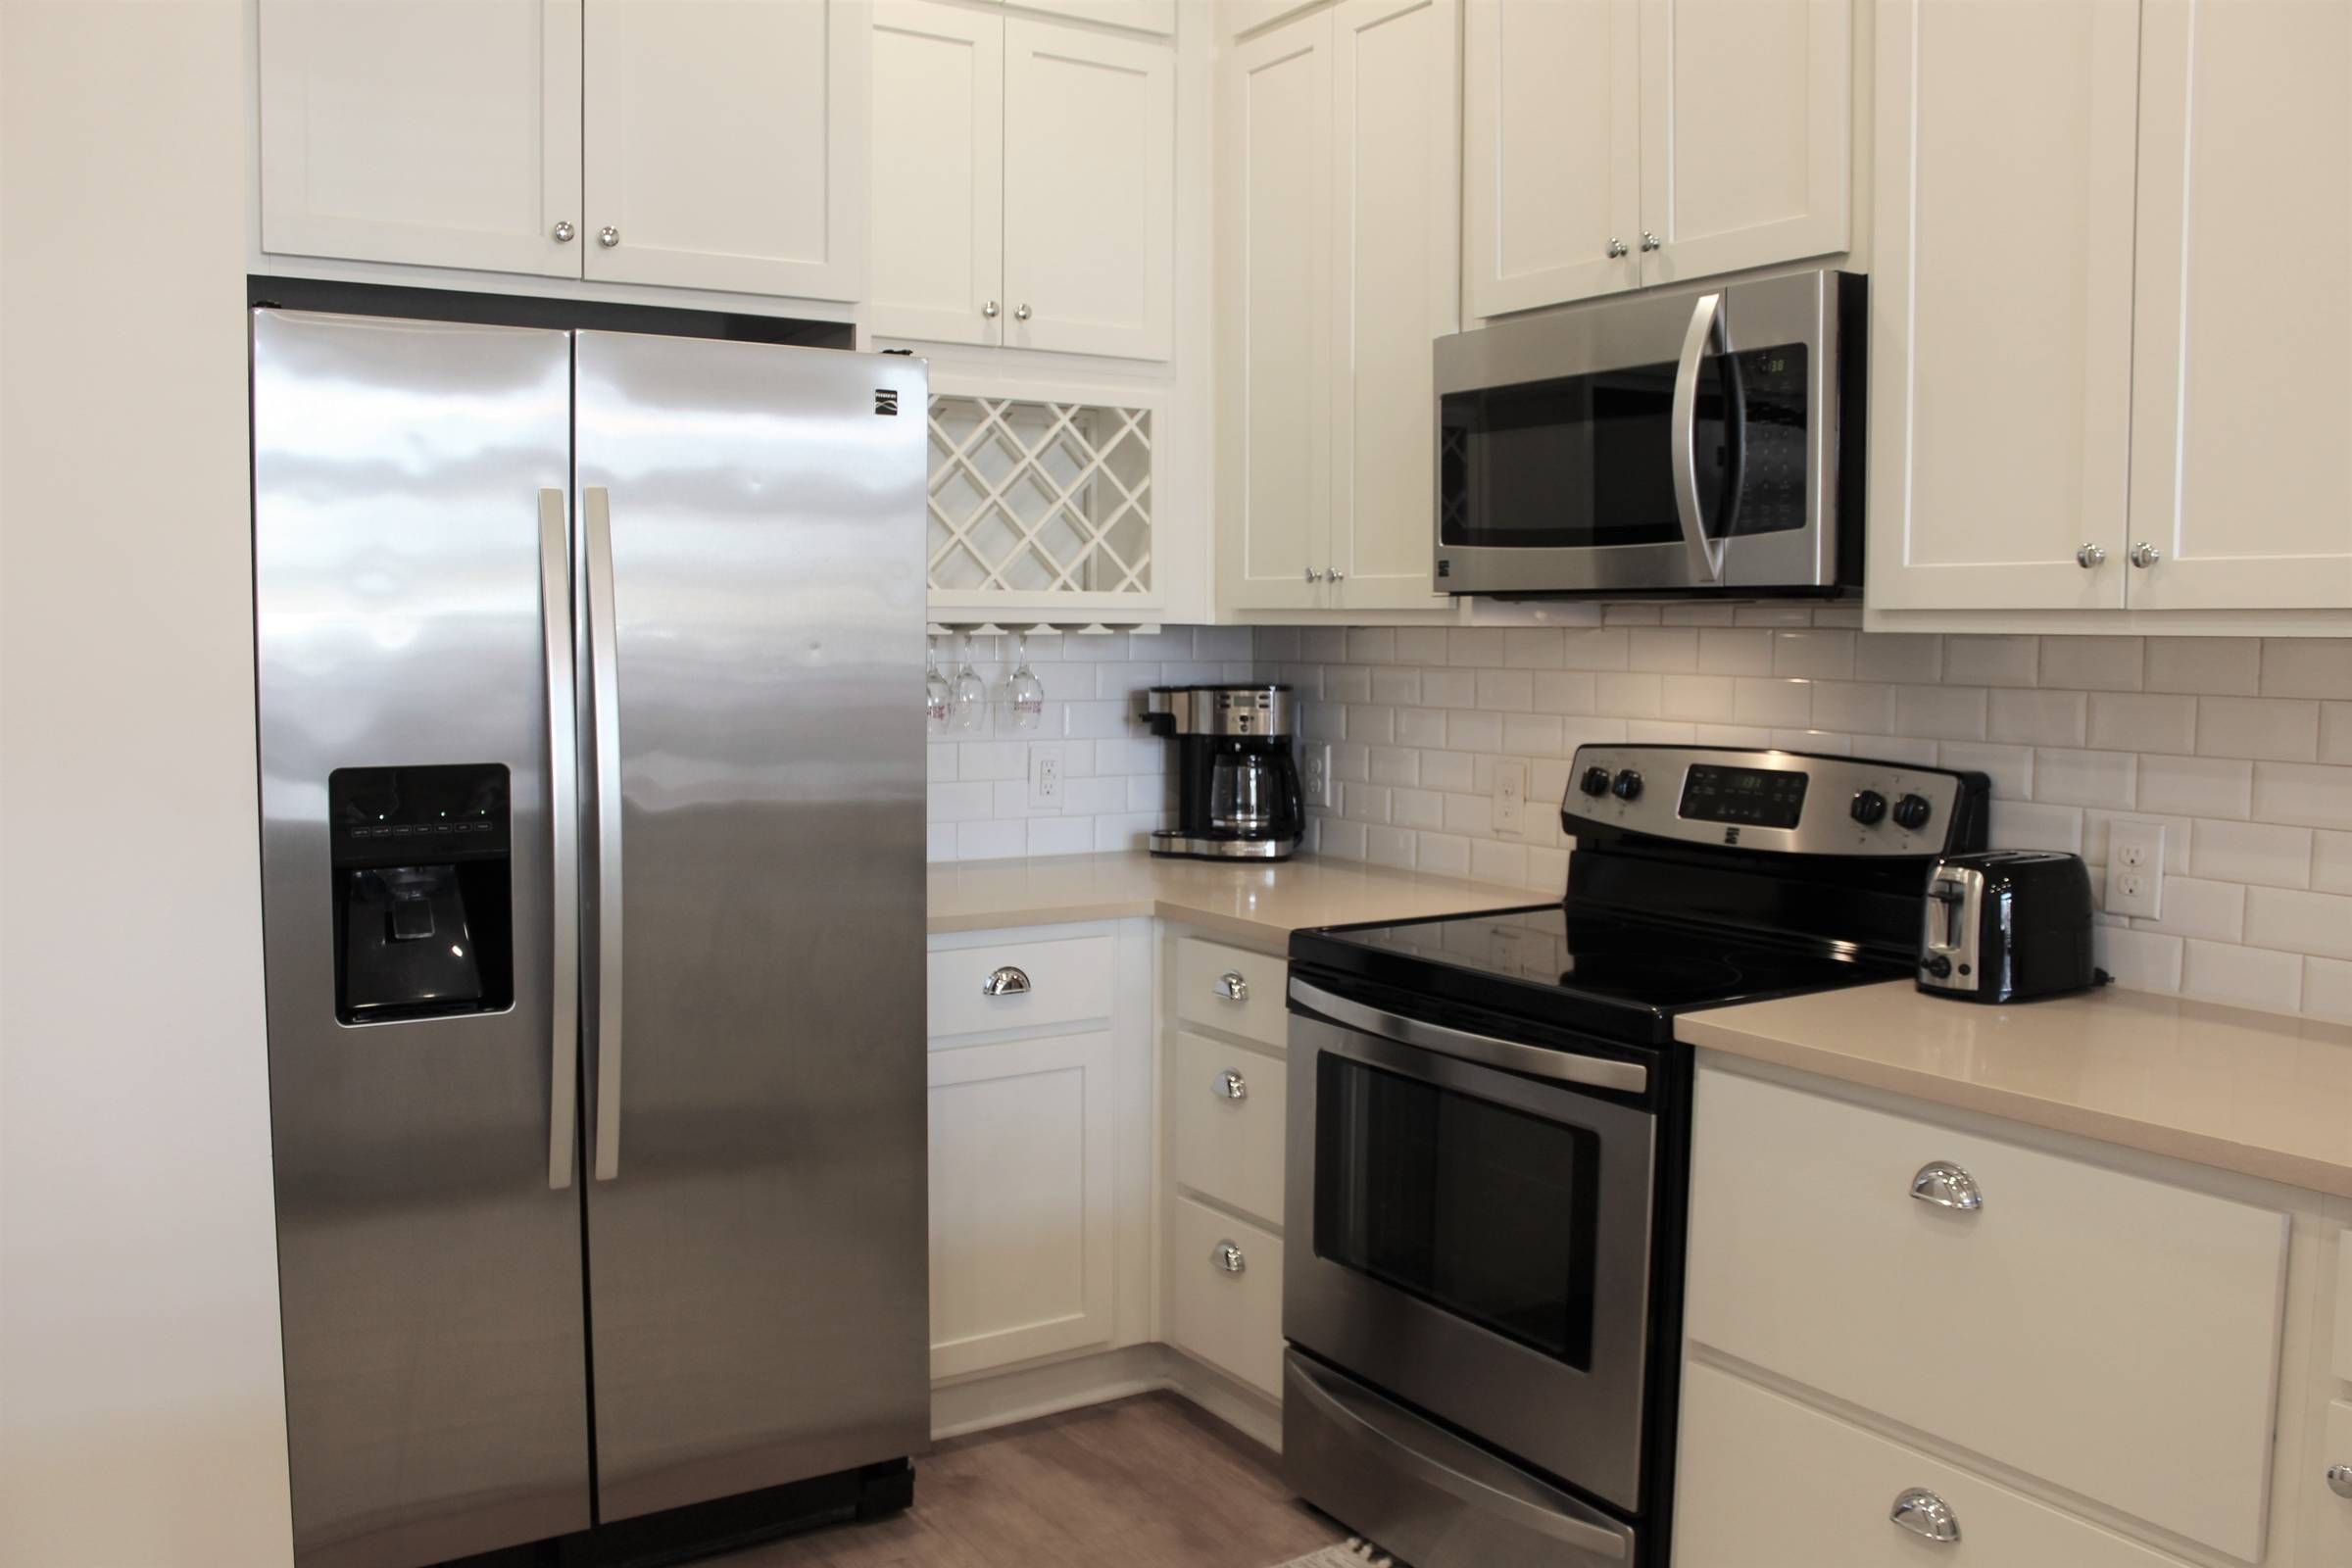 Apartments at holly crest gust suite kitchen with stainless steel appliances